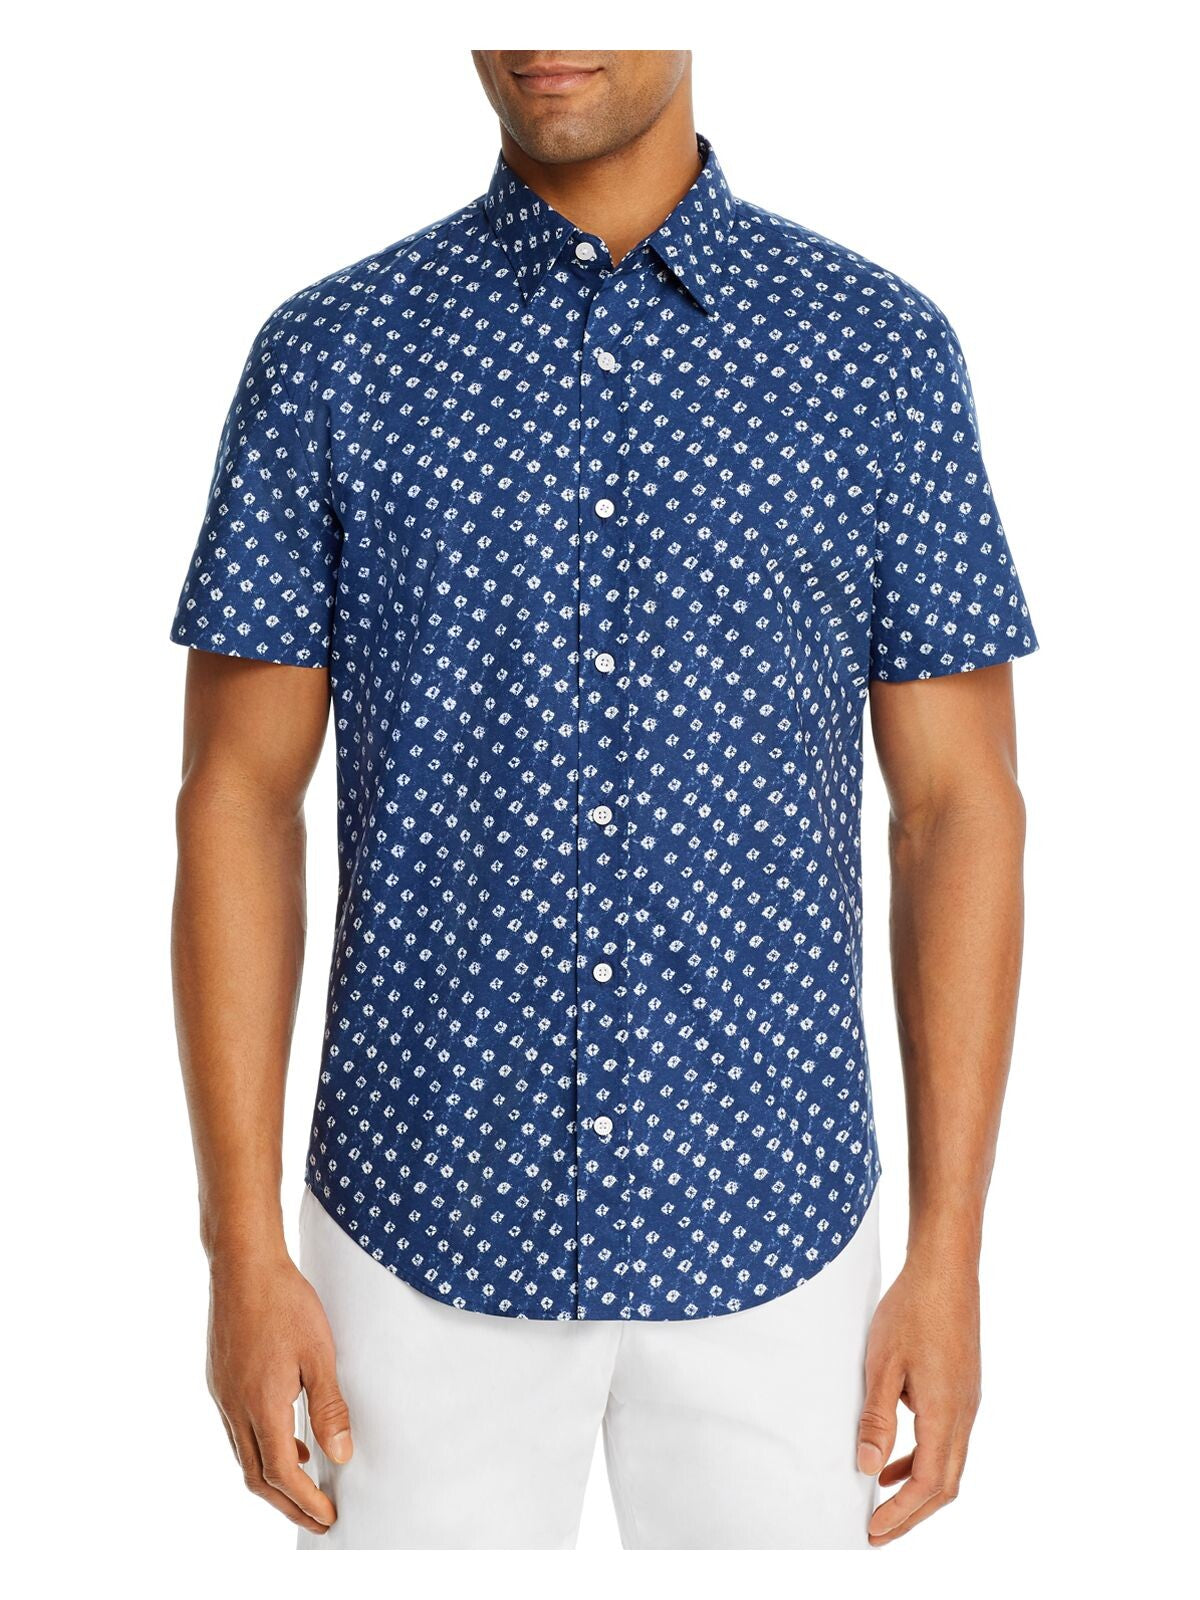 The Mens store Mens Blue Patterned Short Sleeve Classic Fit Button Down Casual Shirt S